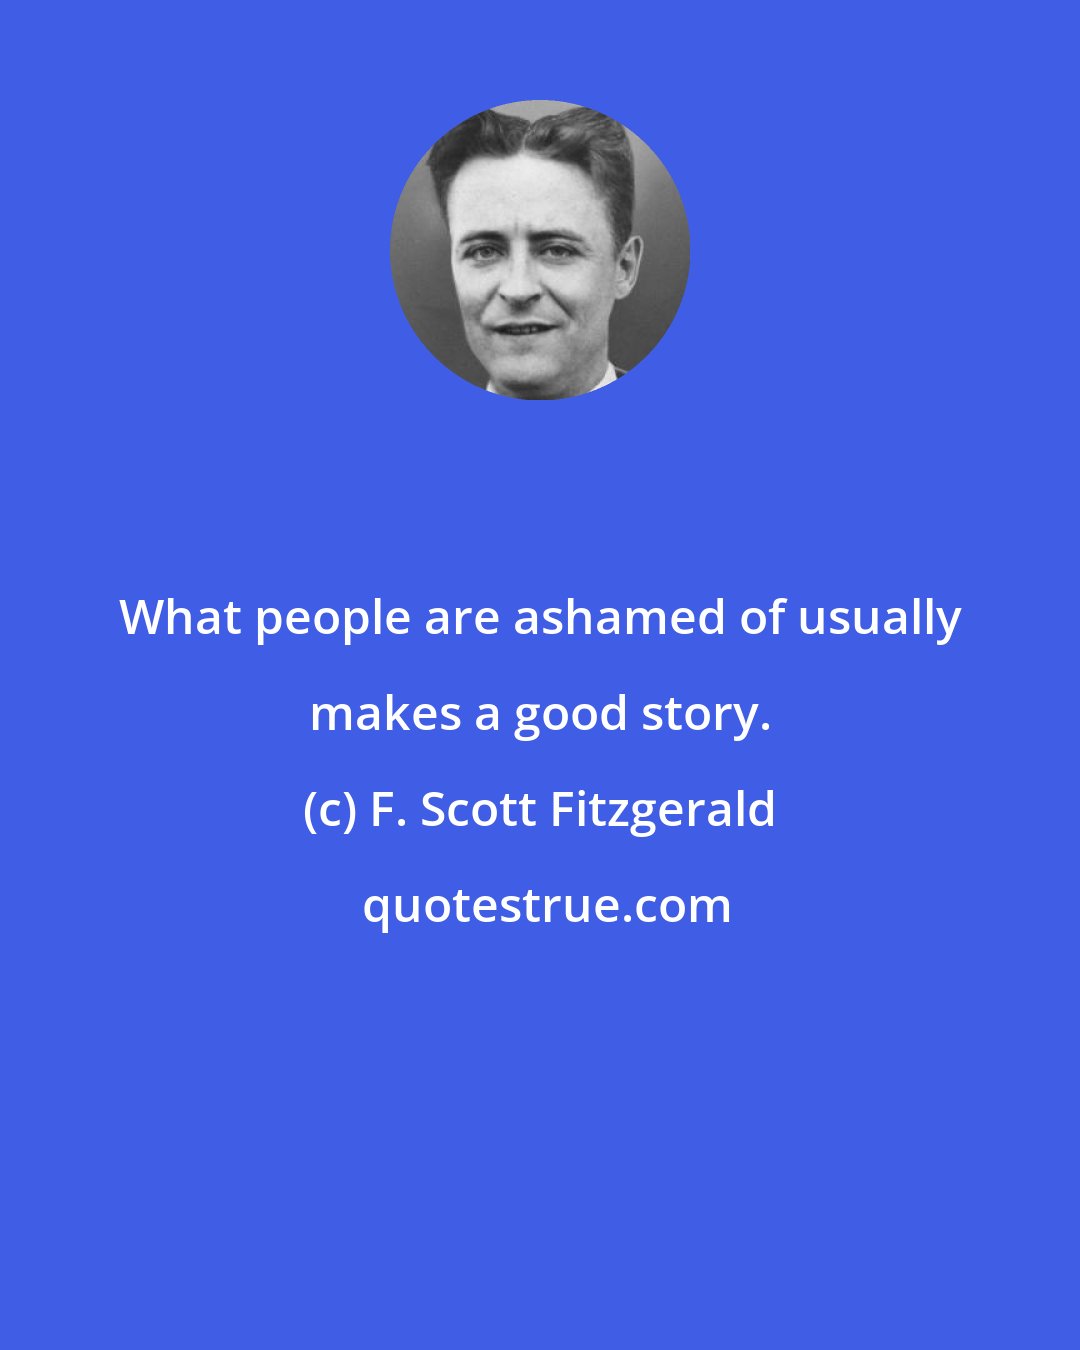 F. Scott Fitzgerald: What people are ashamed of usually makes a good story.